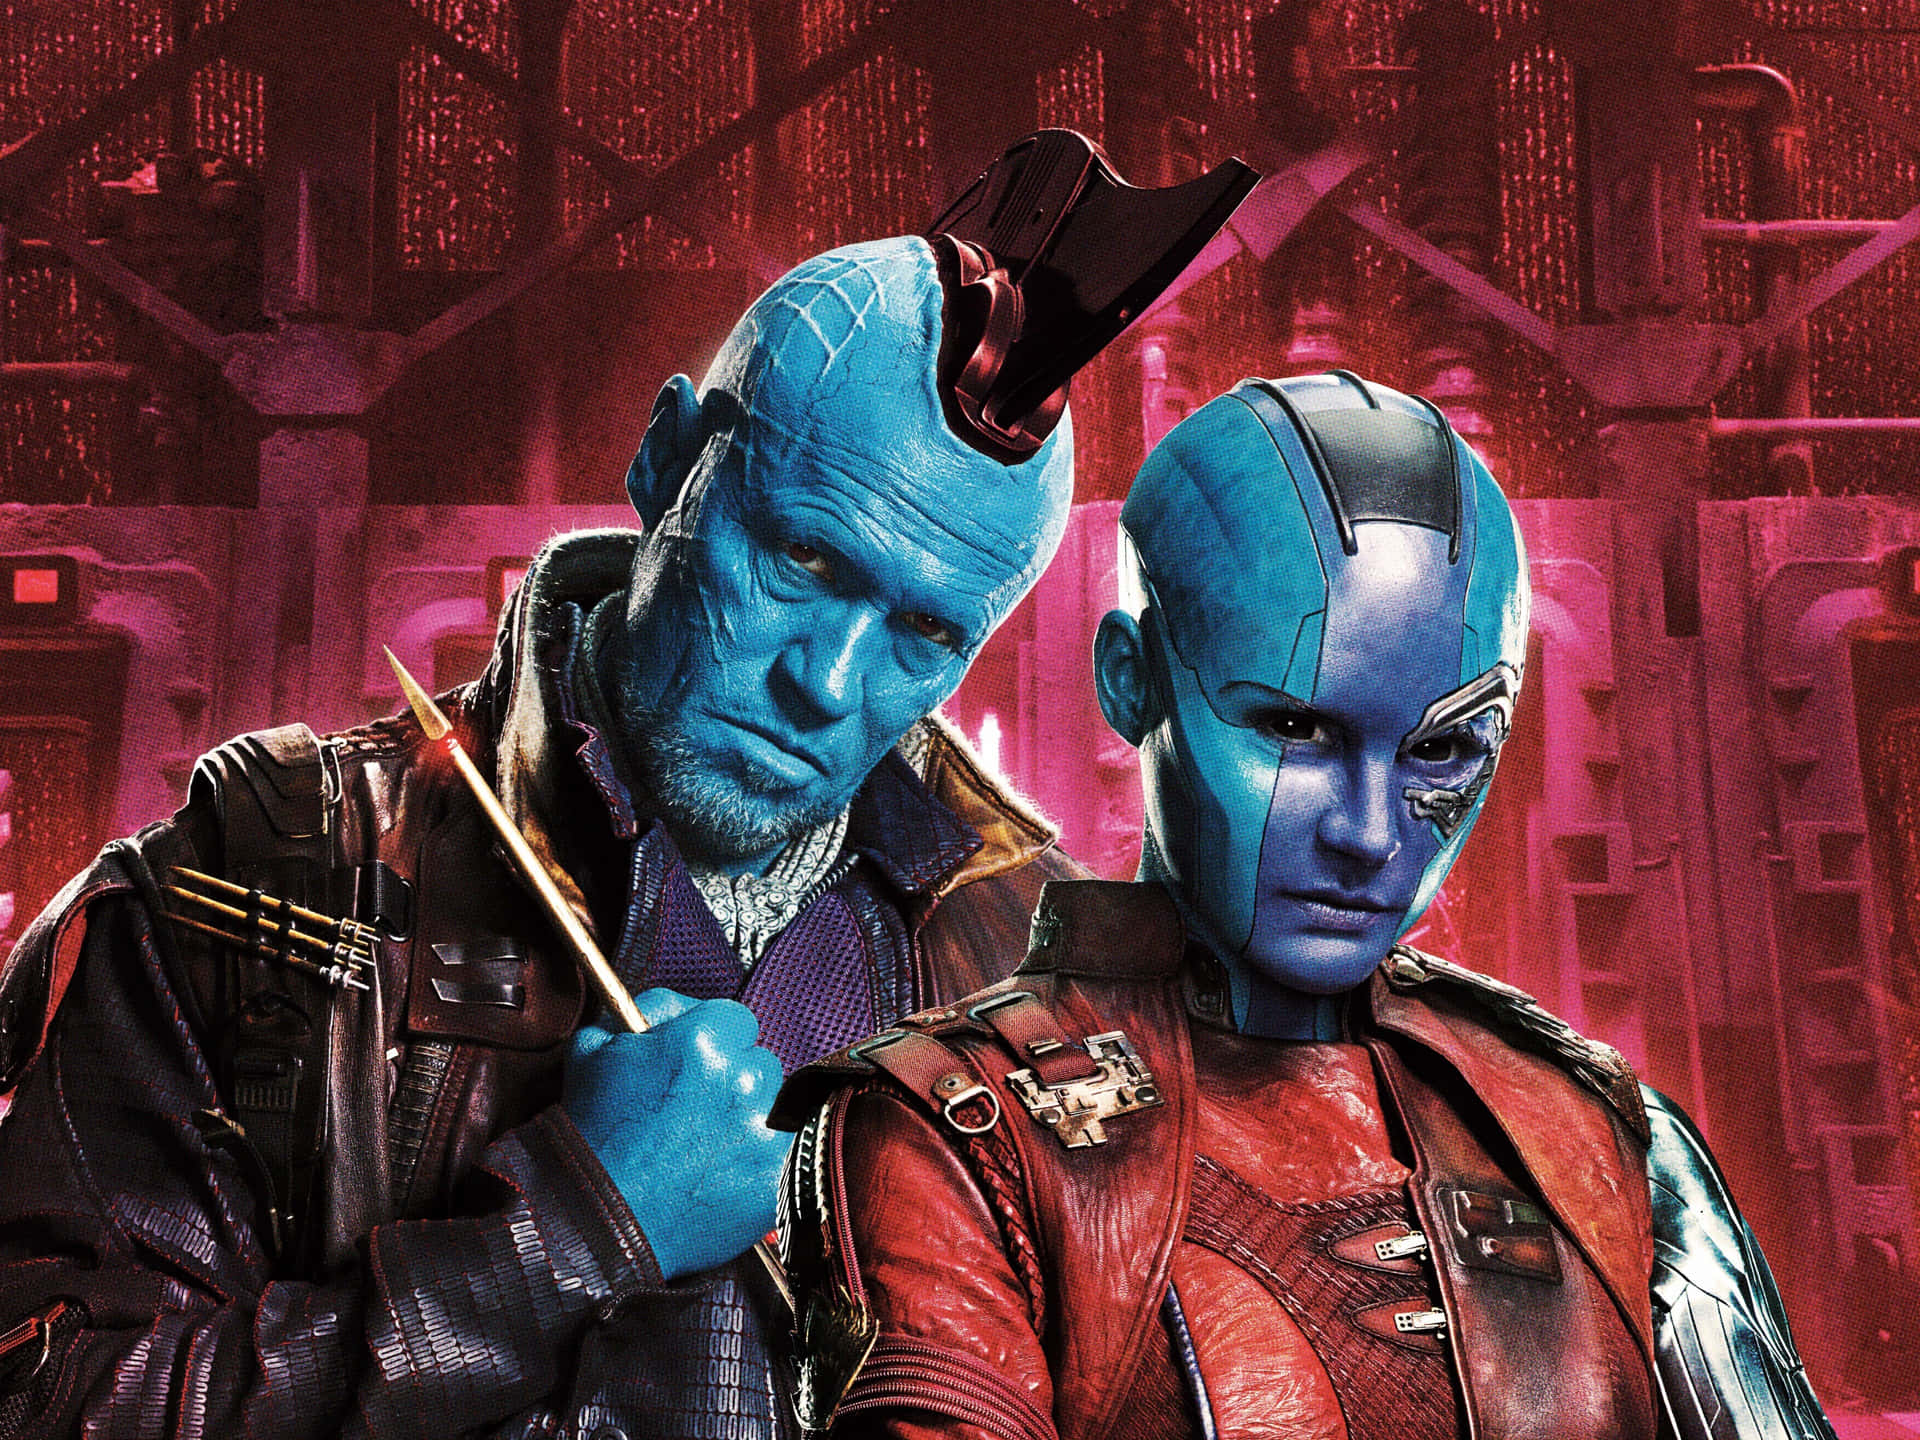 "See the Guardians of the Galaxy return for a daring sequel!" Wallpaper